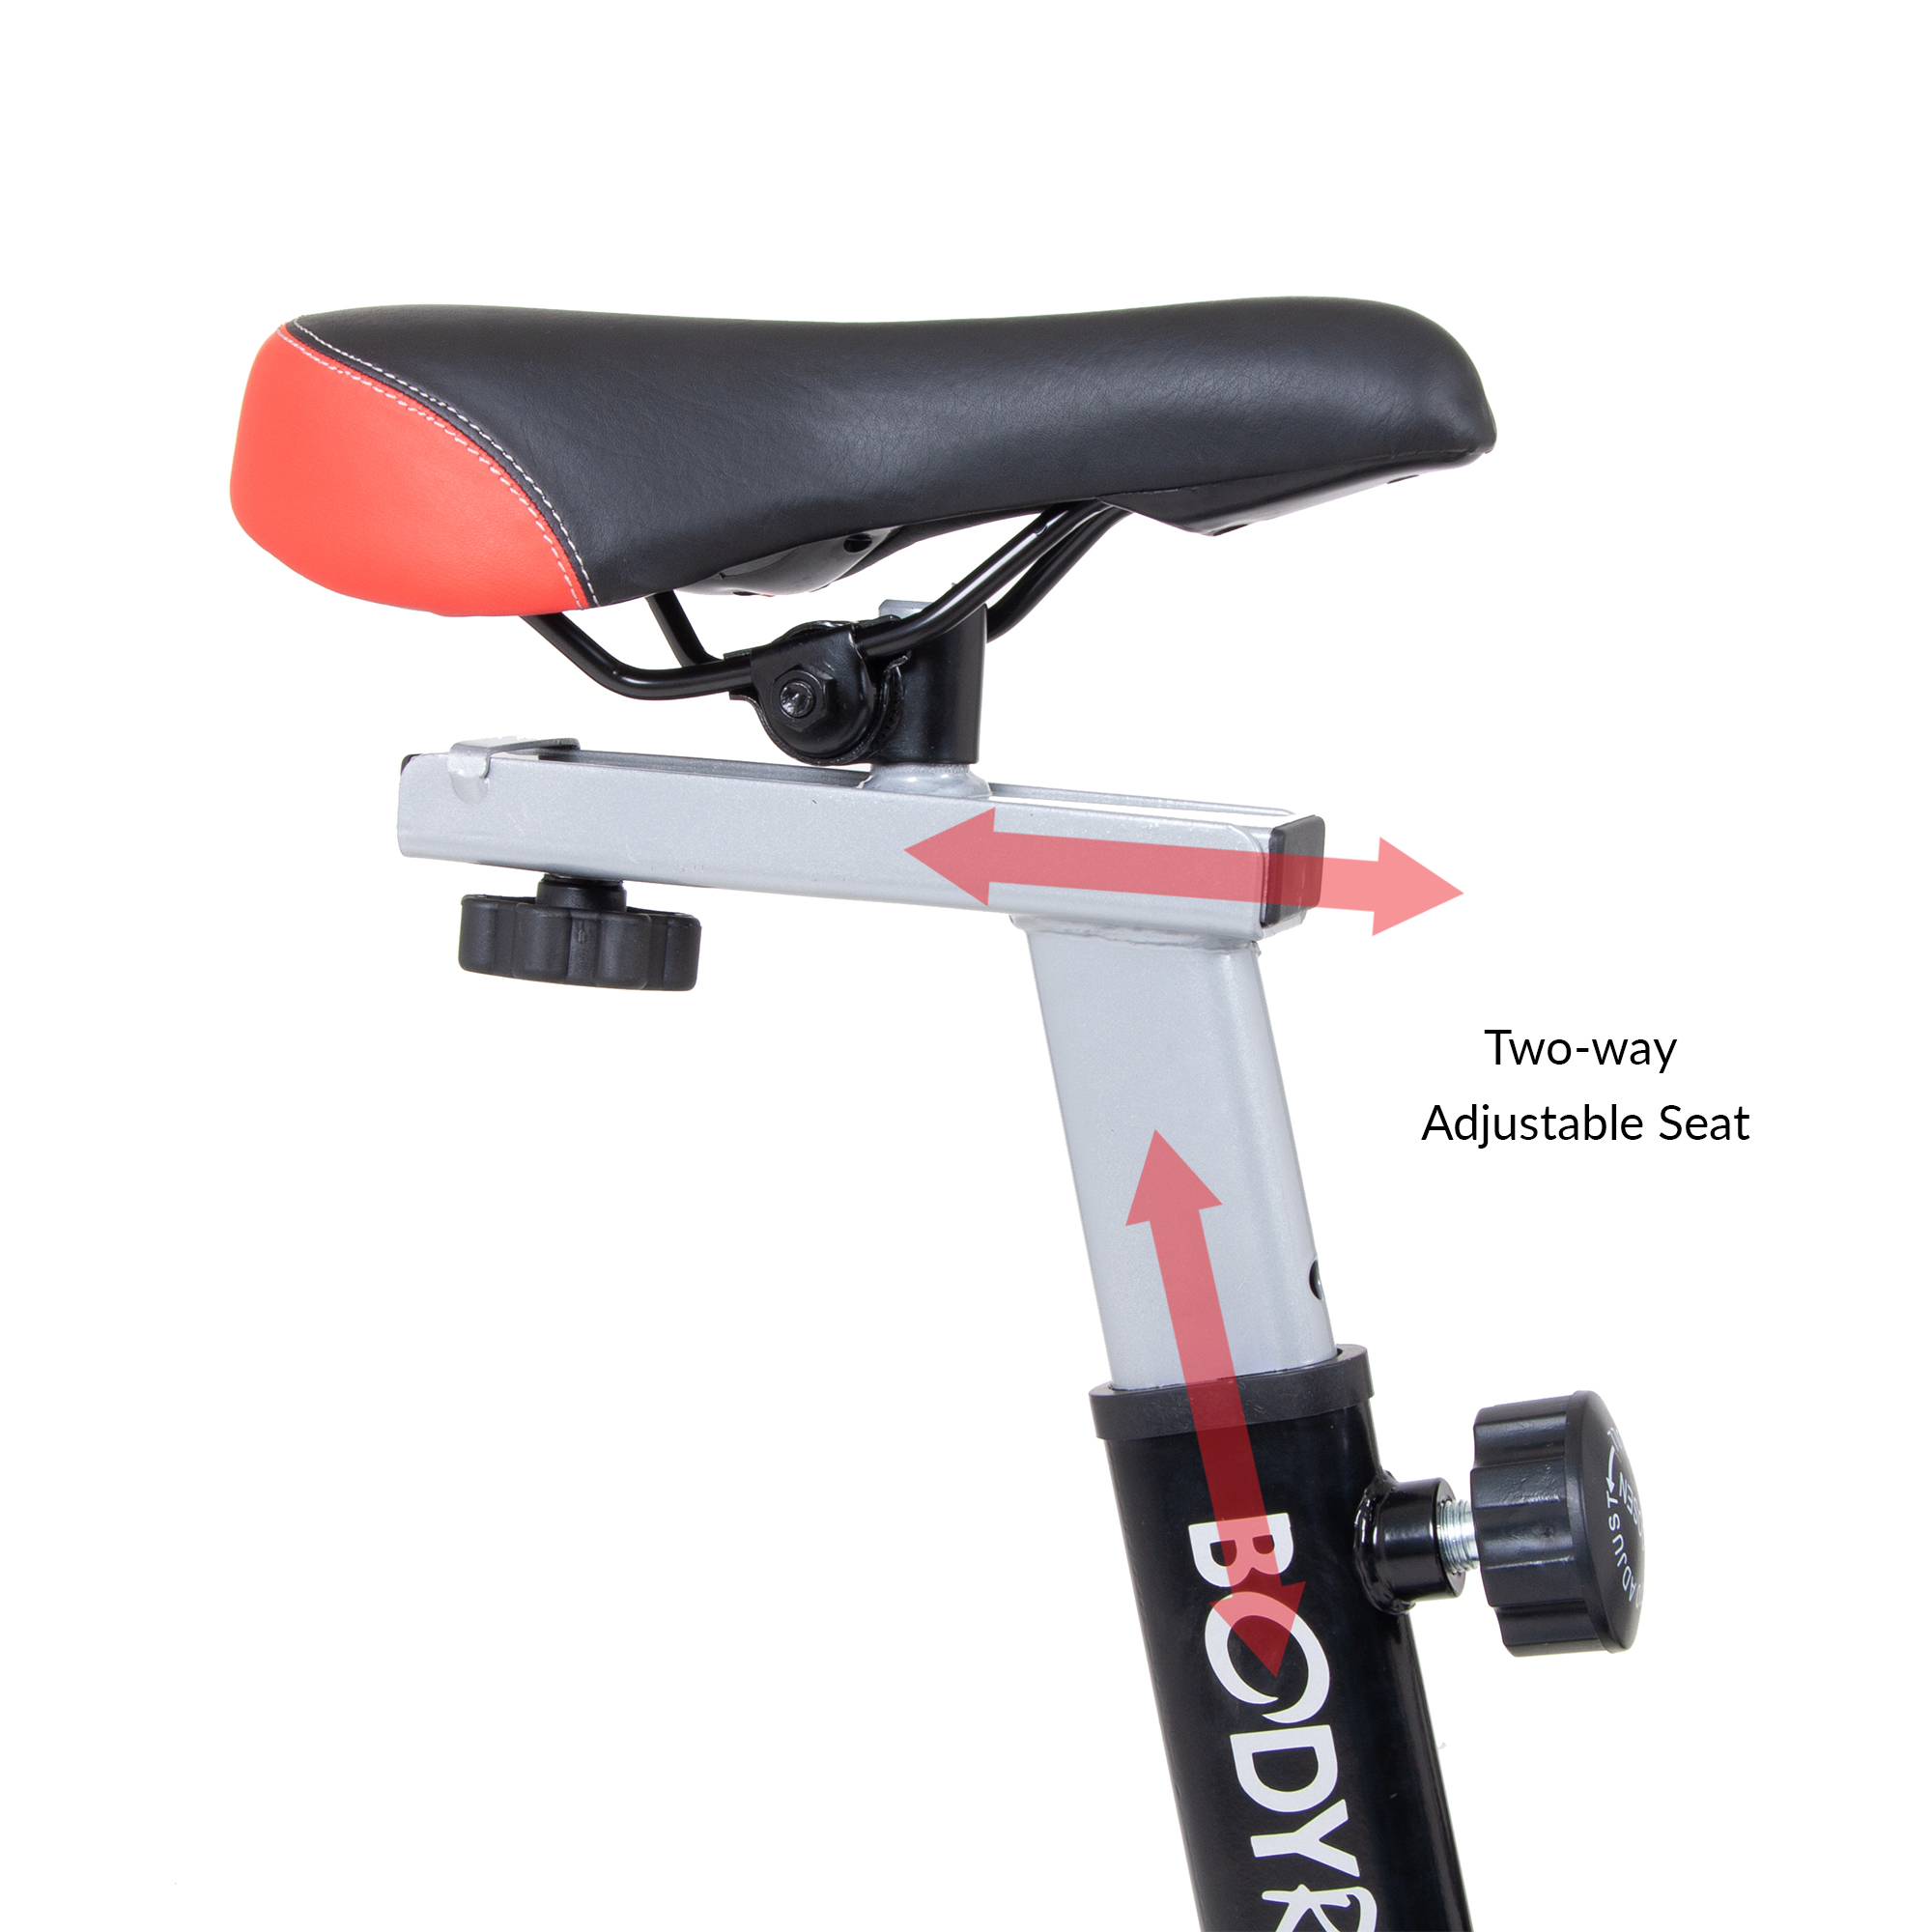 Body Rider ERG7000 PRO Cycling Trainer Stationary Bike, Max. Weight Capacity 250 Lbs. - image 3 of 7